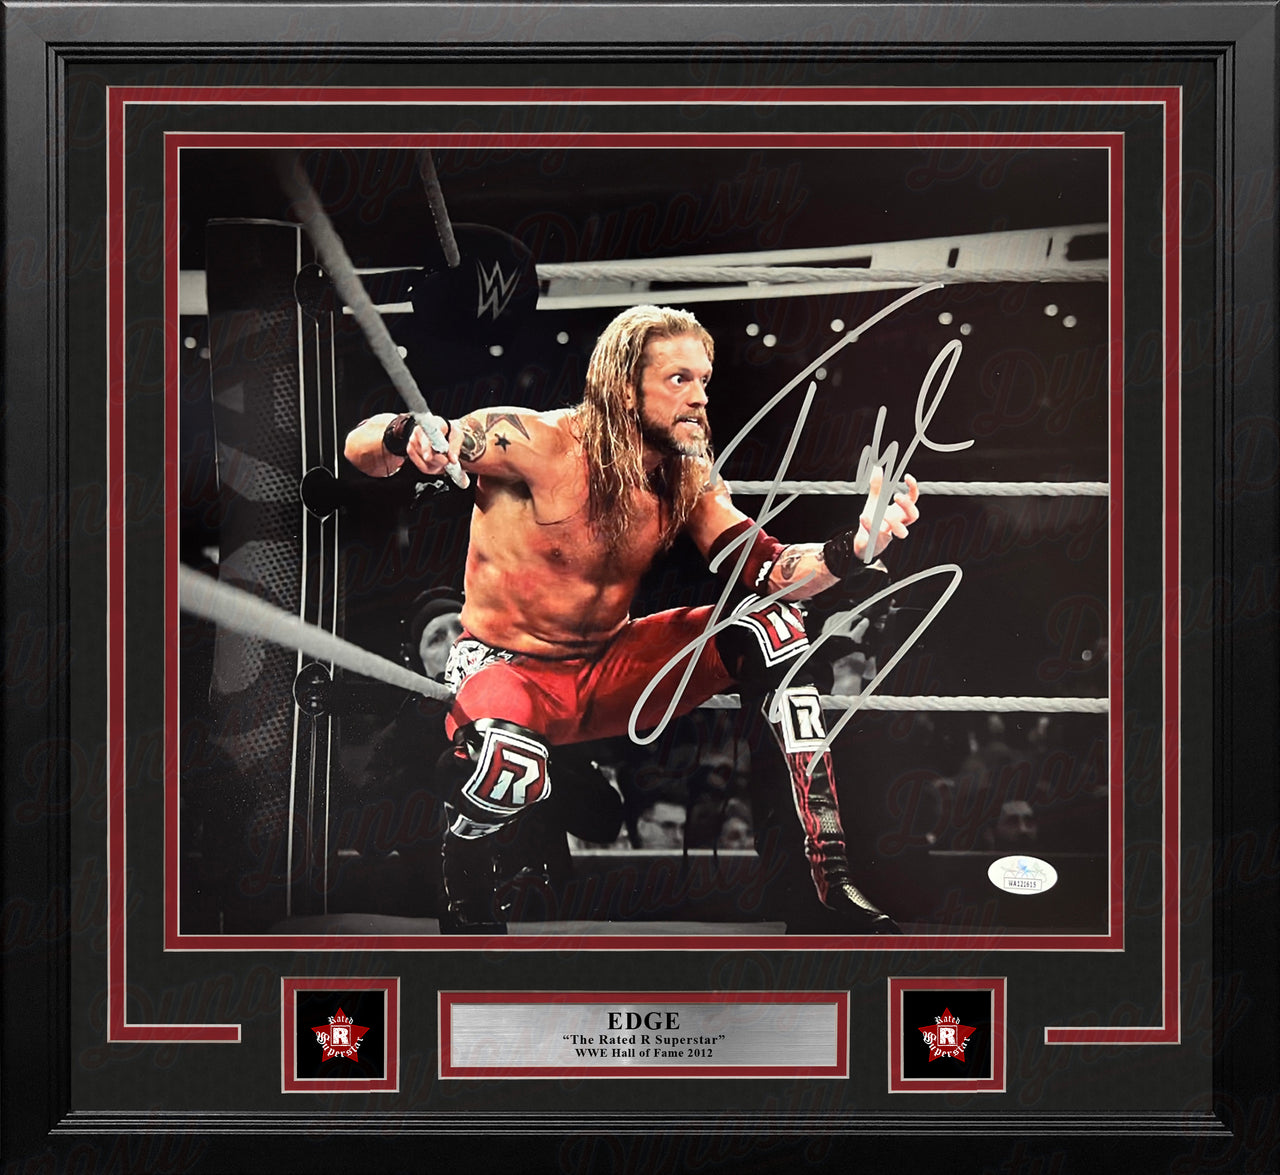 Edge Sets Up the Spear Autographed Framed WWE Wrestling Photo - Dynasty Sports & Framing 